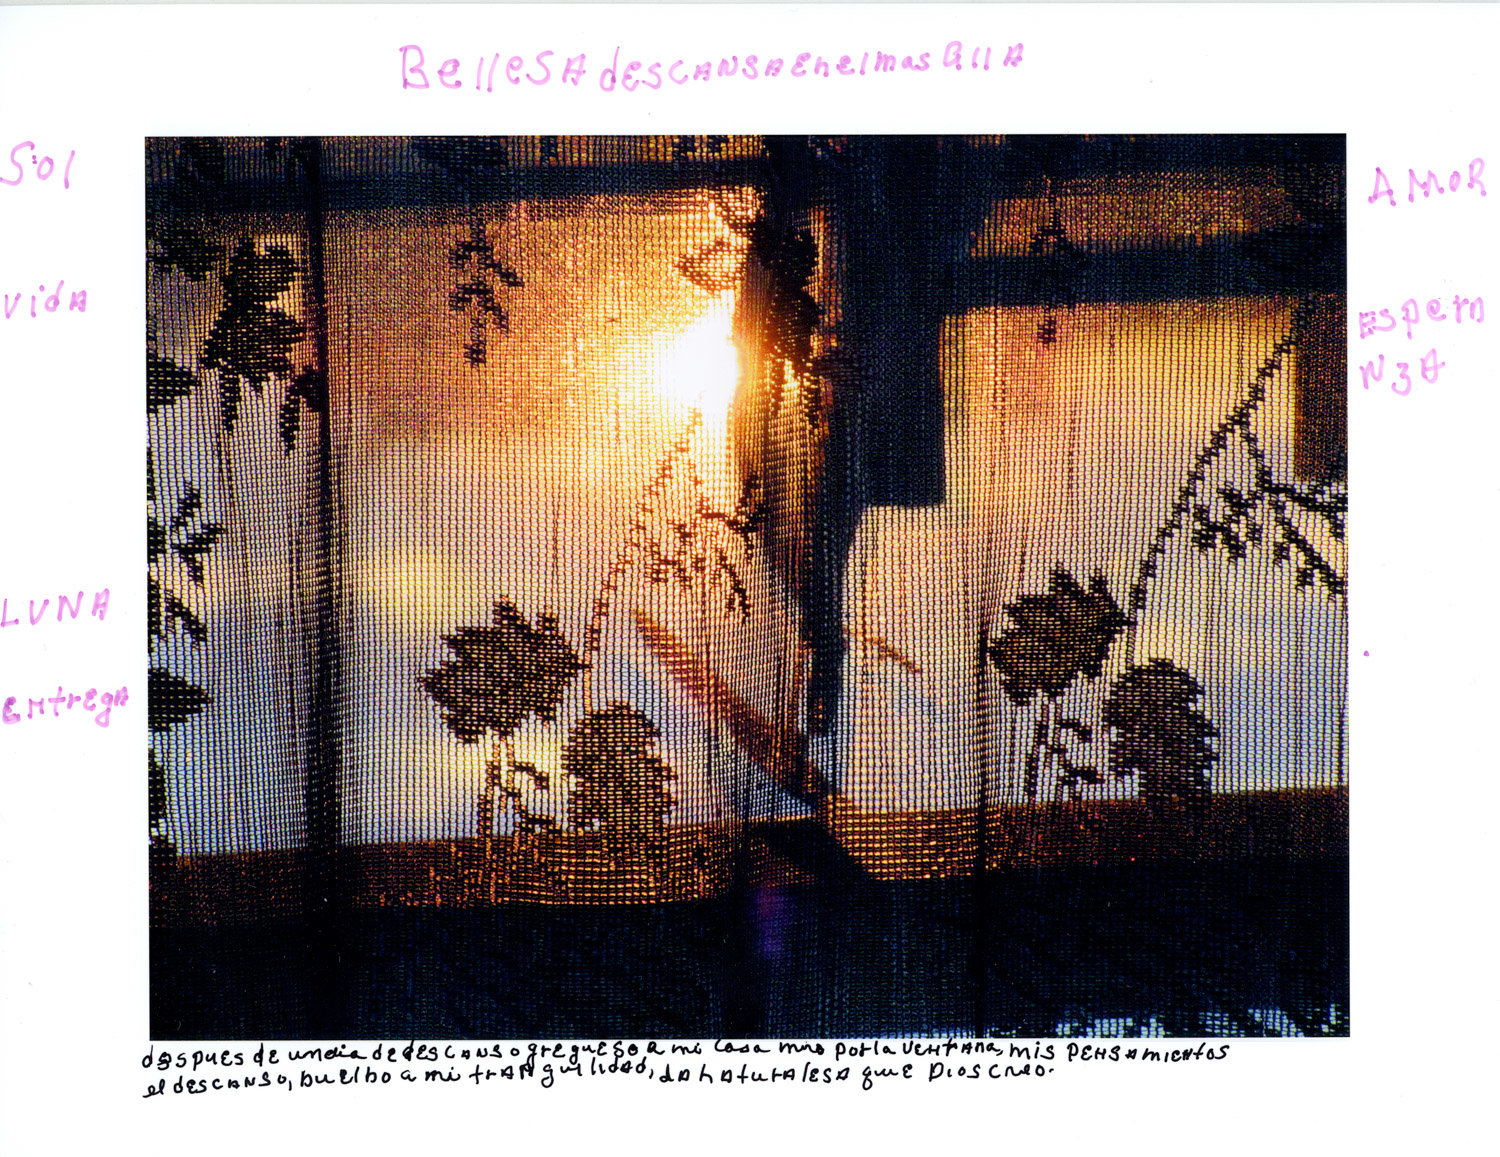 Carmen Adorno photographed the late day sun through a curtain she made in her home, and wrote musings in Spanish on the print. Adorno is a member of the Bronx Senior Photo League, which is having a group exhibition at the Bronx Documentary Center through Feb. 2.